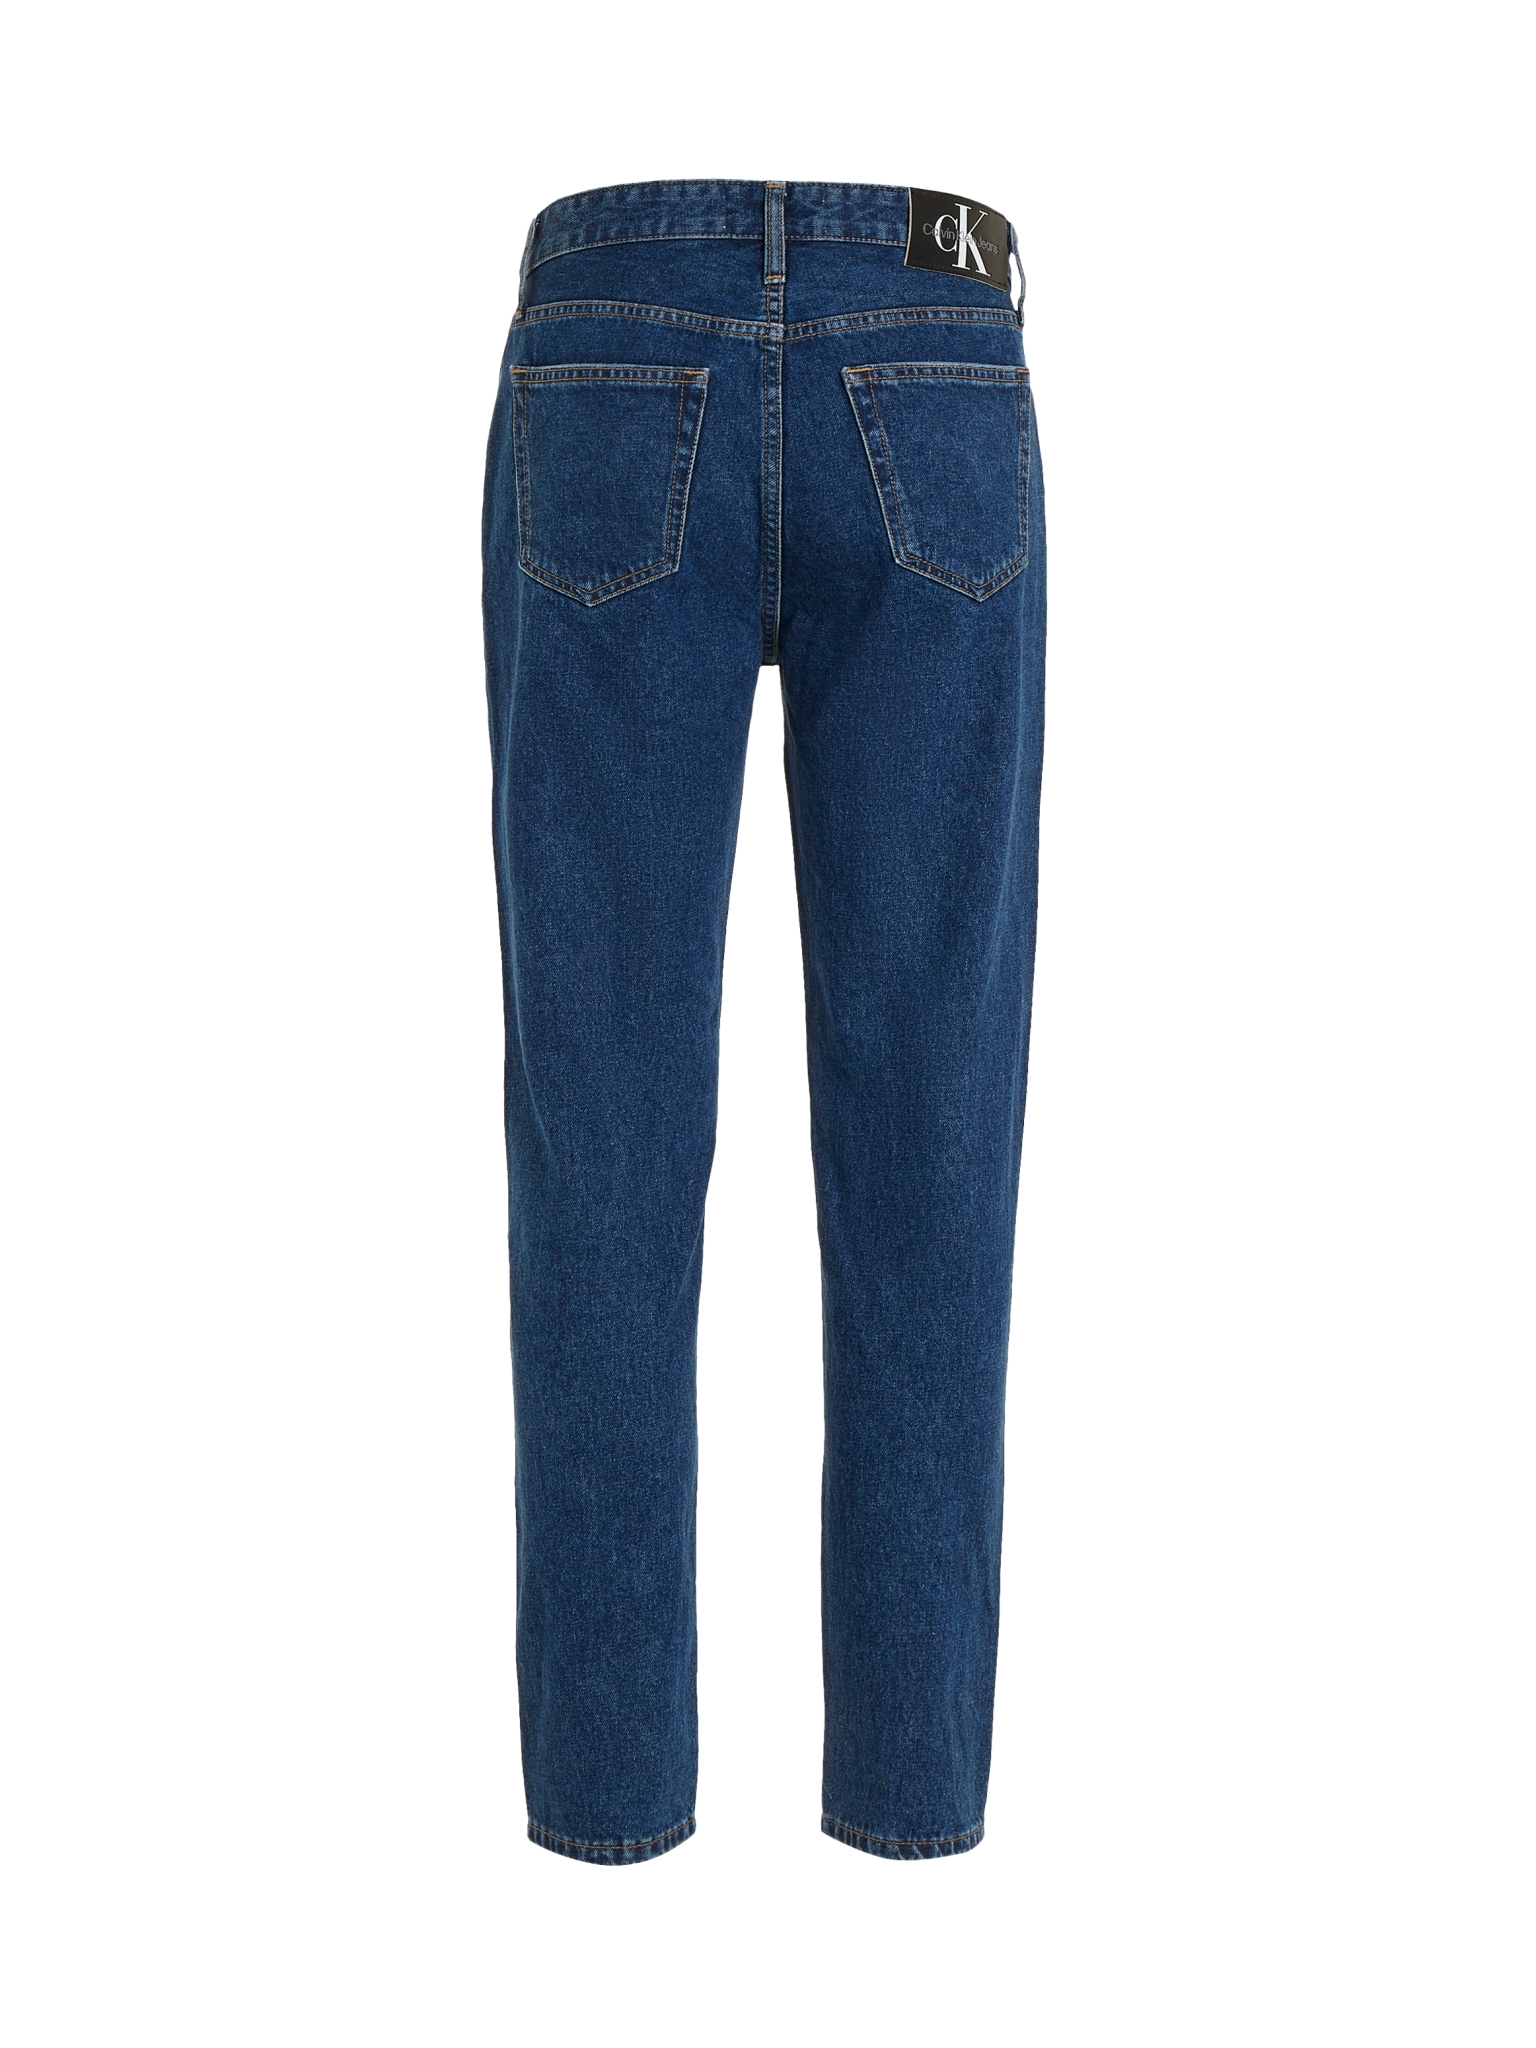 CALVIN KLEIN JEANS Tapered Jeans 10728408